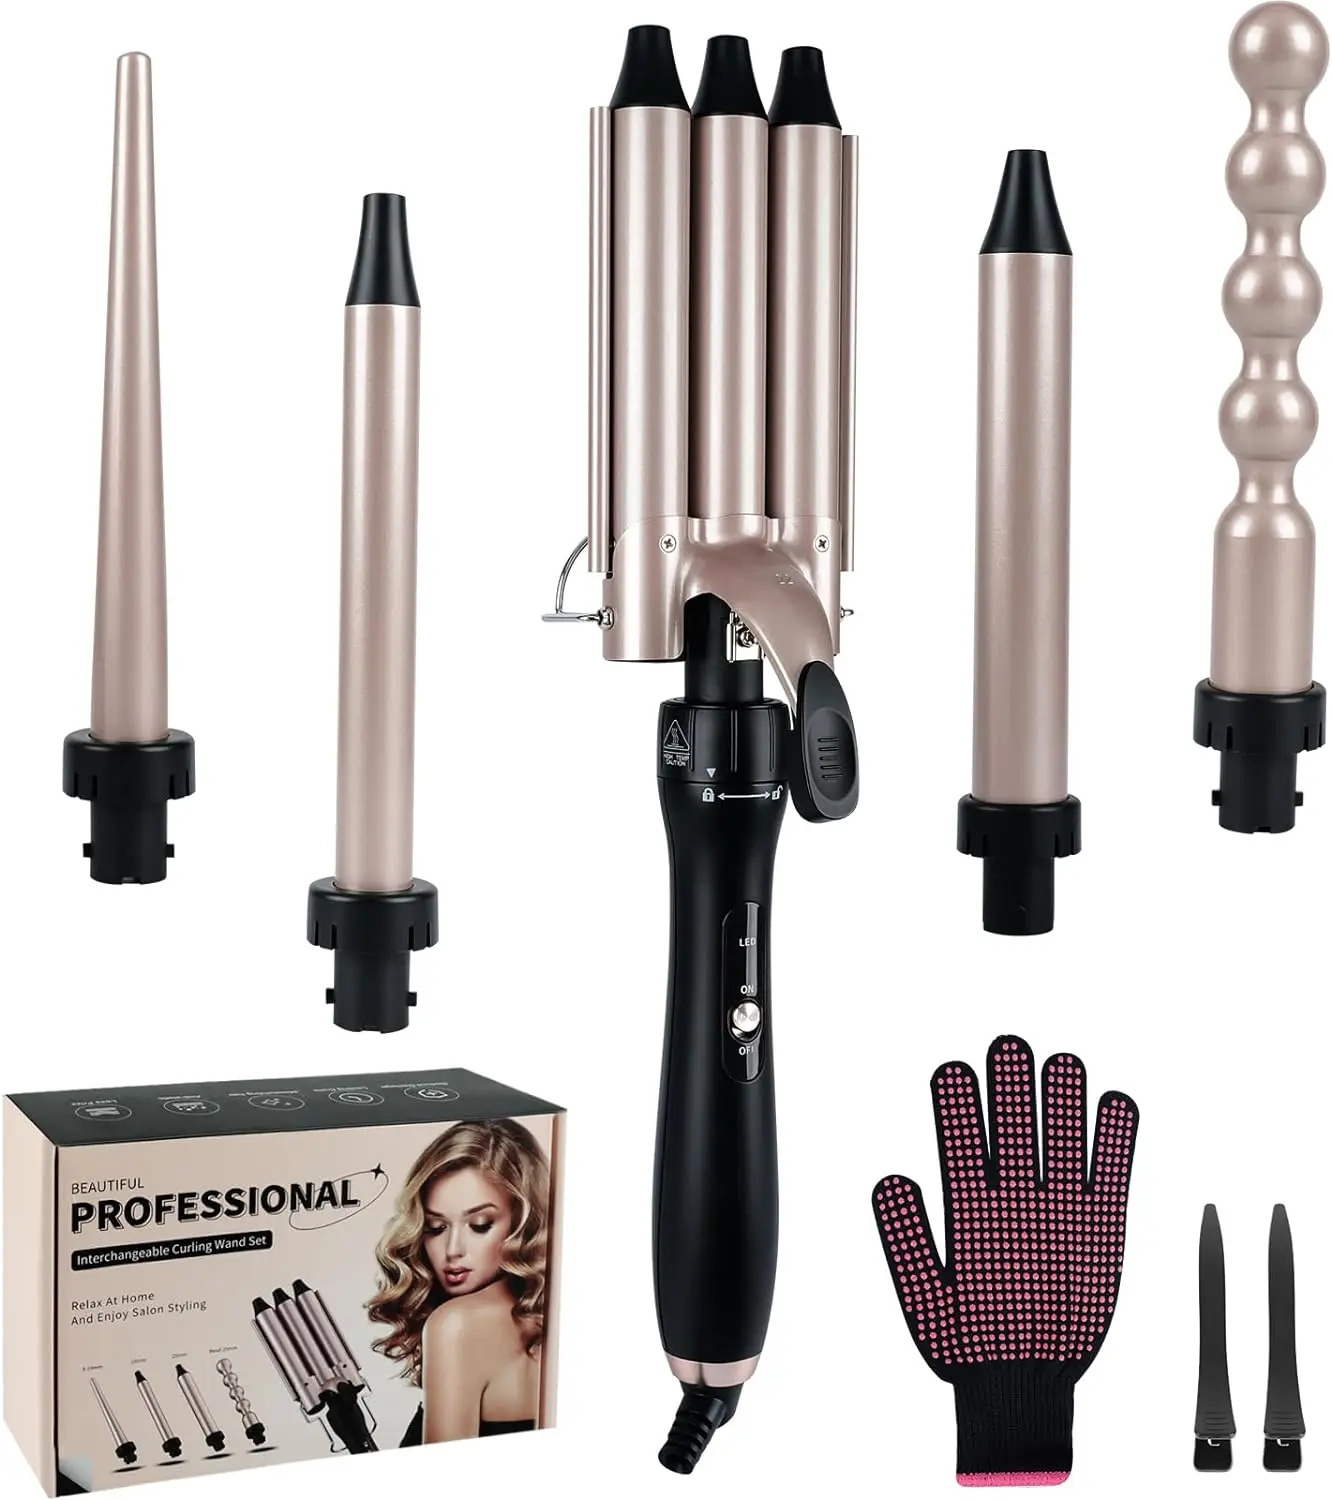 

Interchangeable Ceramic Hair Curler Heating Curling Wand Dual Voltage Waver 5 in 1 Curling Iron Set with 3 Barrel Hair Crimper